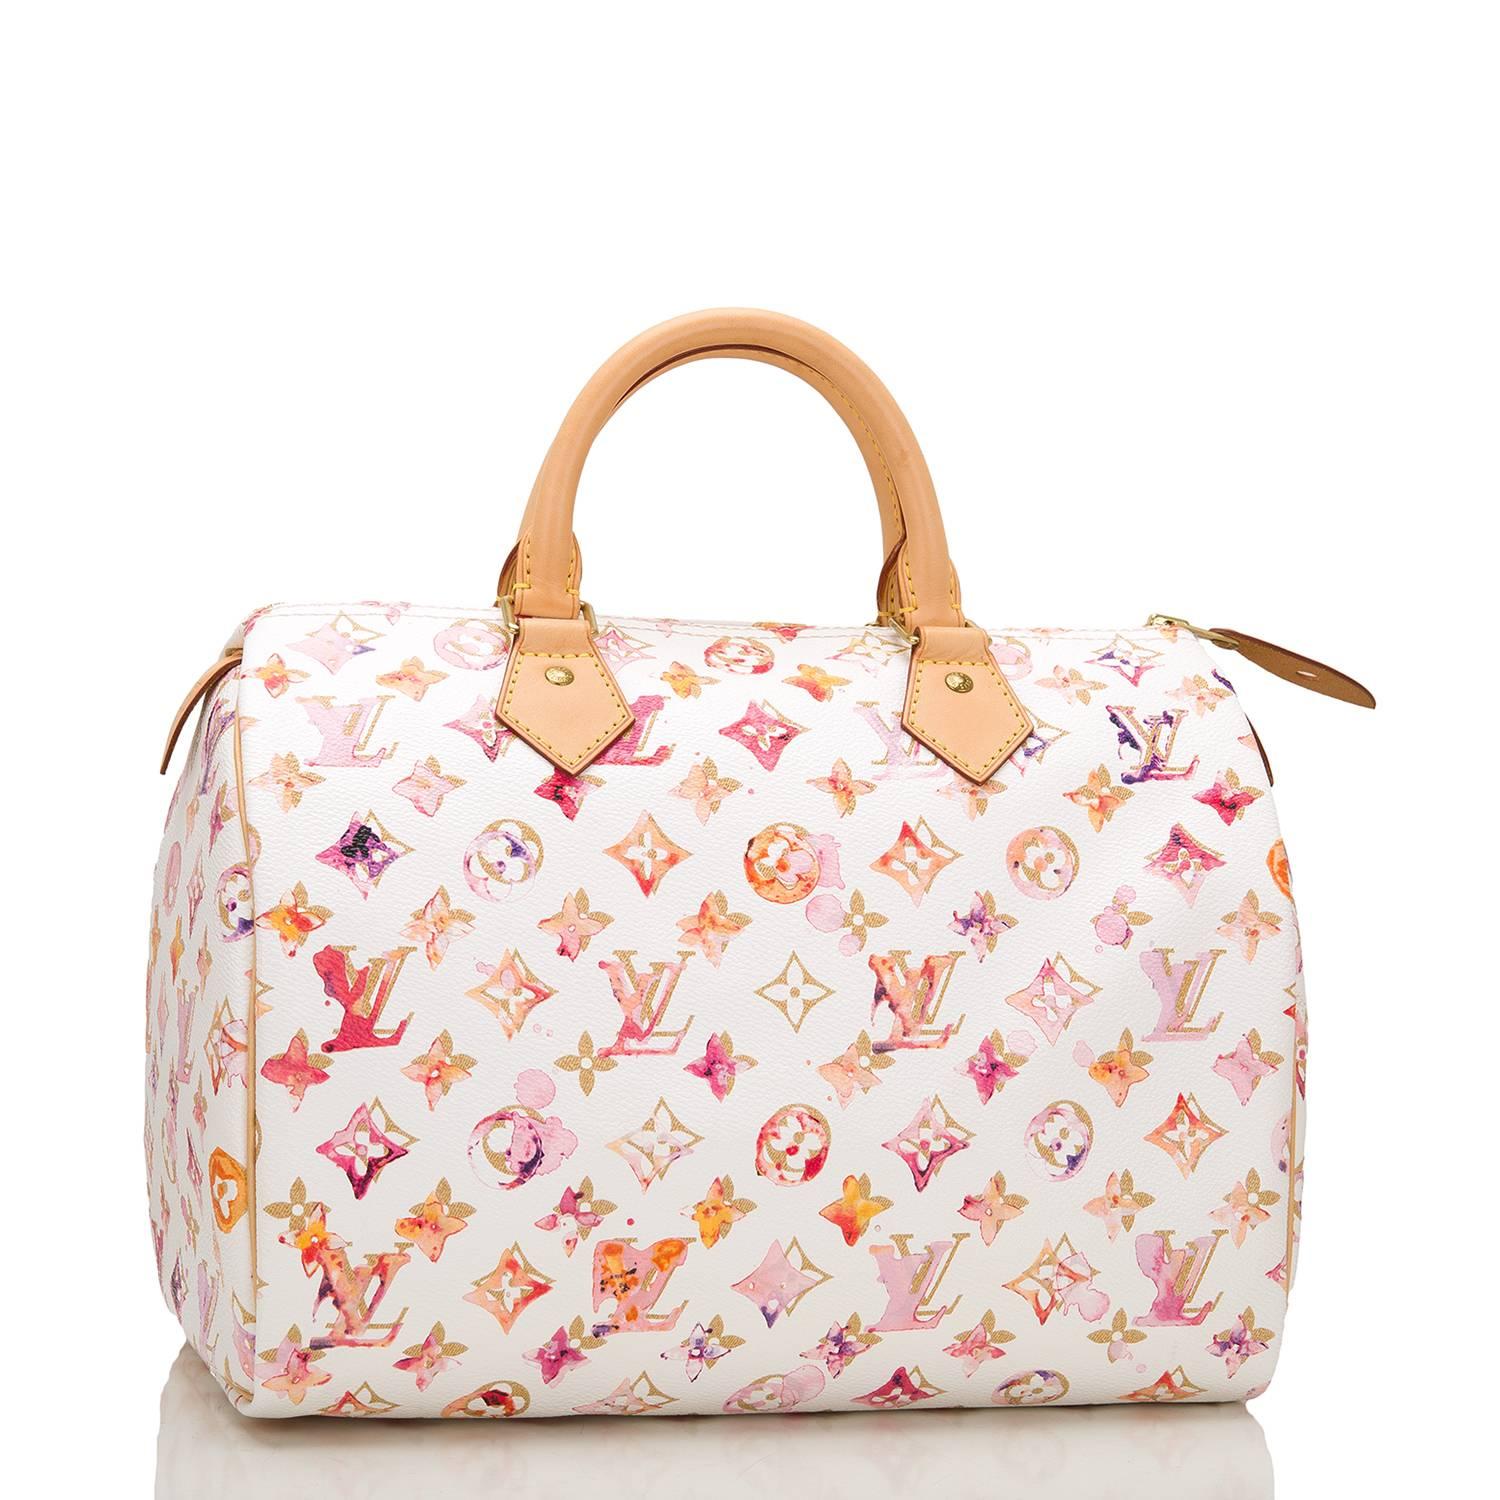 Louis Vuitton limited edition Richard Prince Monogram Watercolor Aquarelle Speedy 30cm of white coated canvas with 